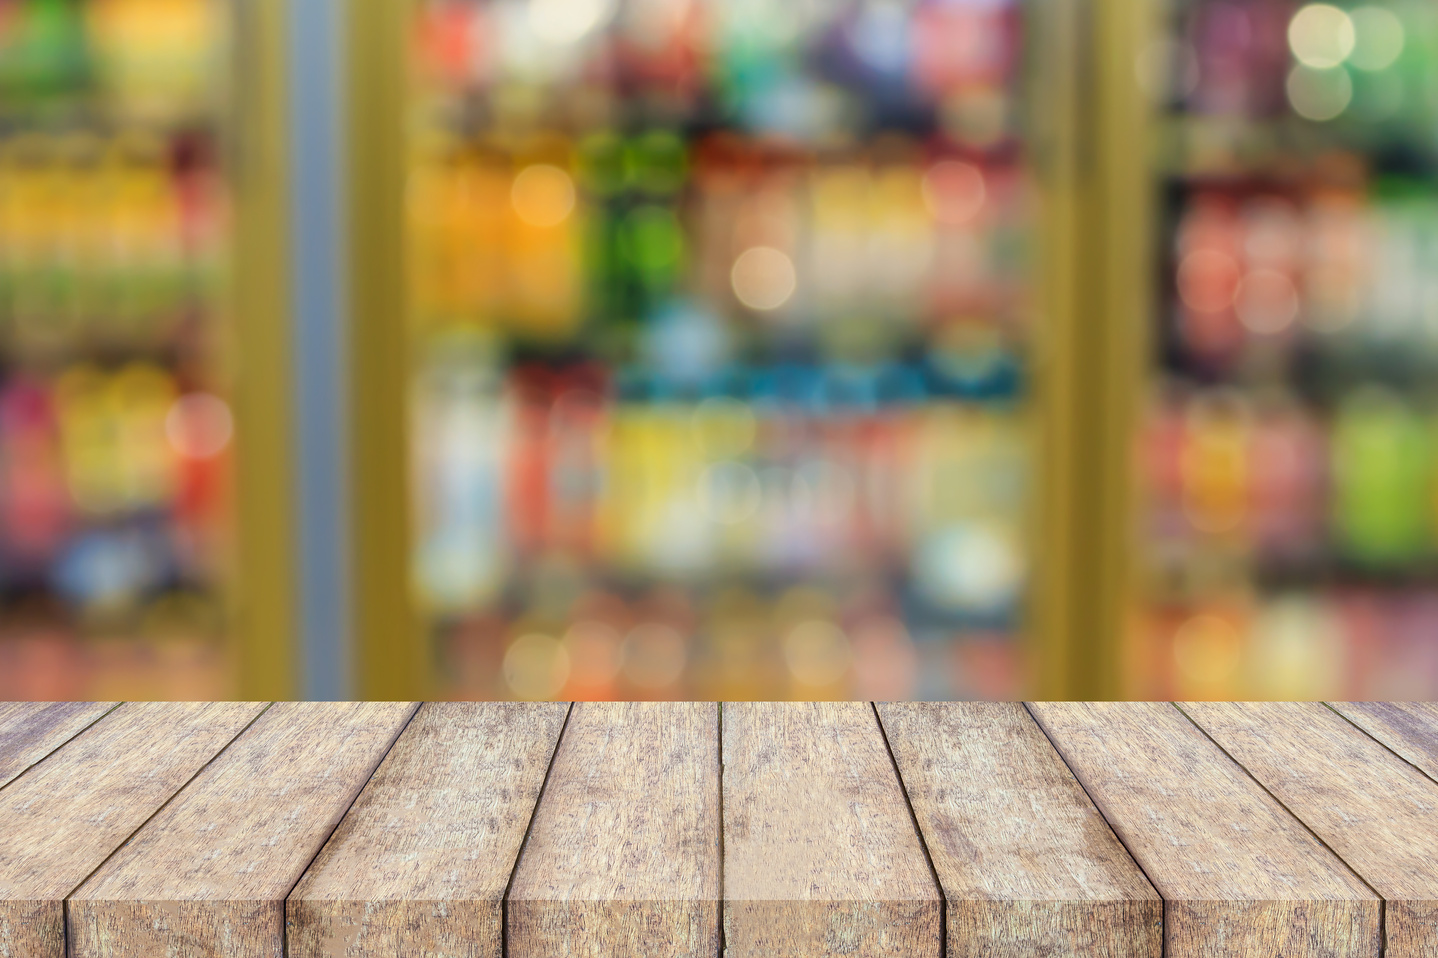 convenience store refrigerator shelves blurred background